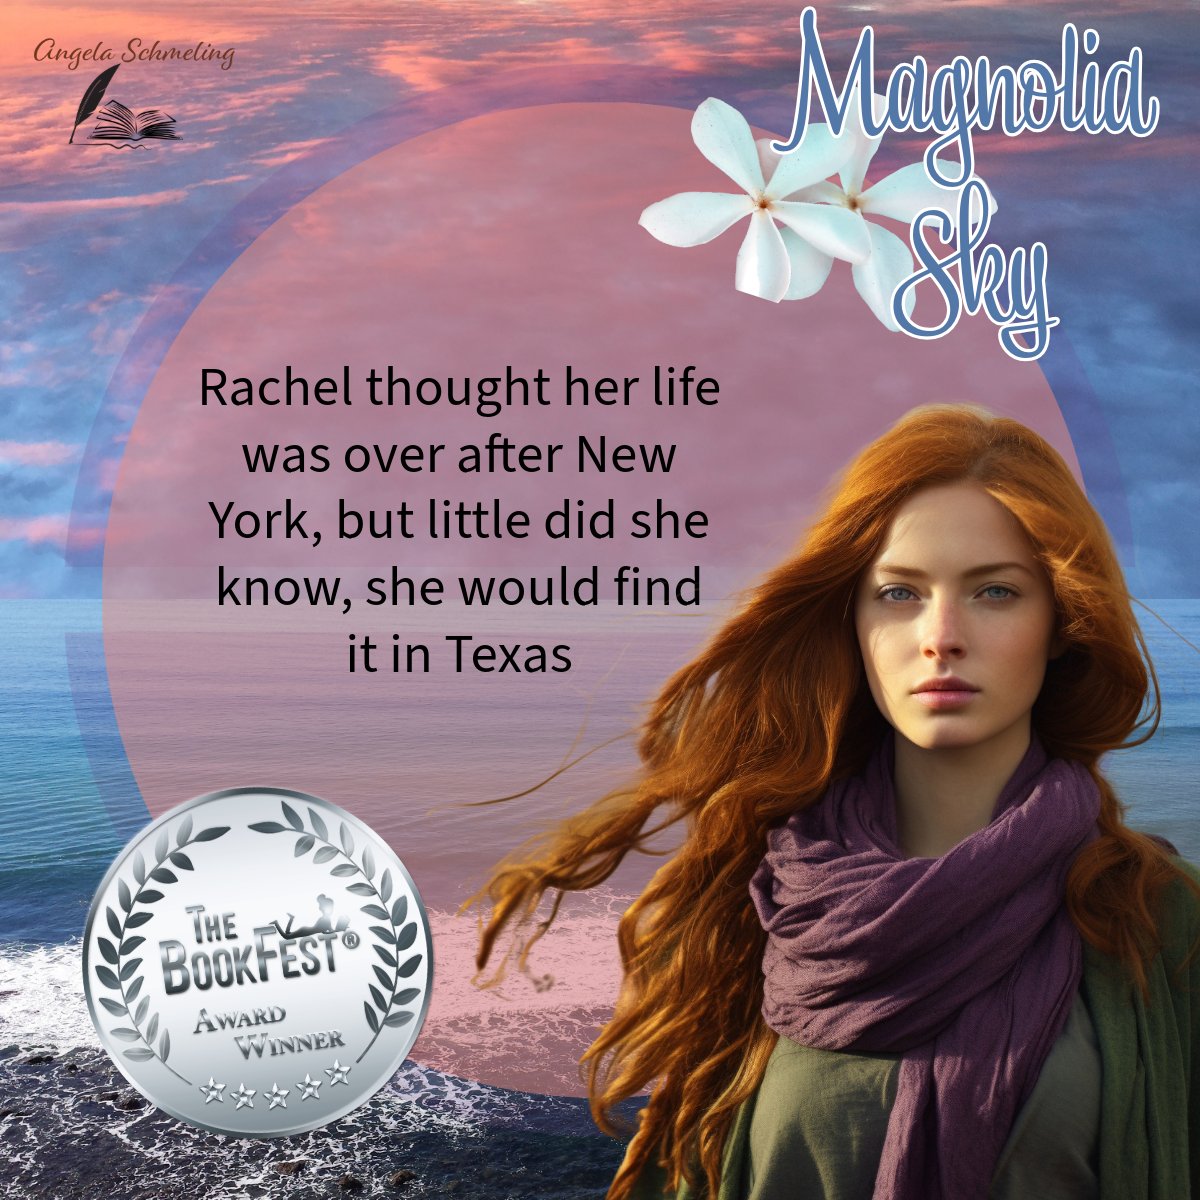 Check out this award winning book today at angelaschmeling.com #books #bookworm #booknerd #booklover #writingcommunity #readingcommunity #ChristianRomance #booksbooksbooks